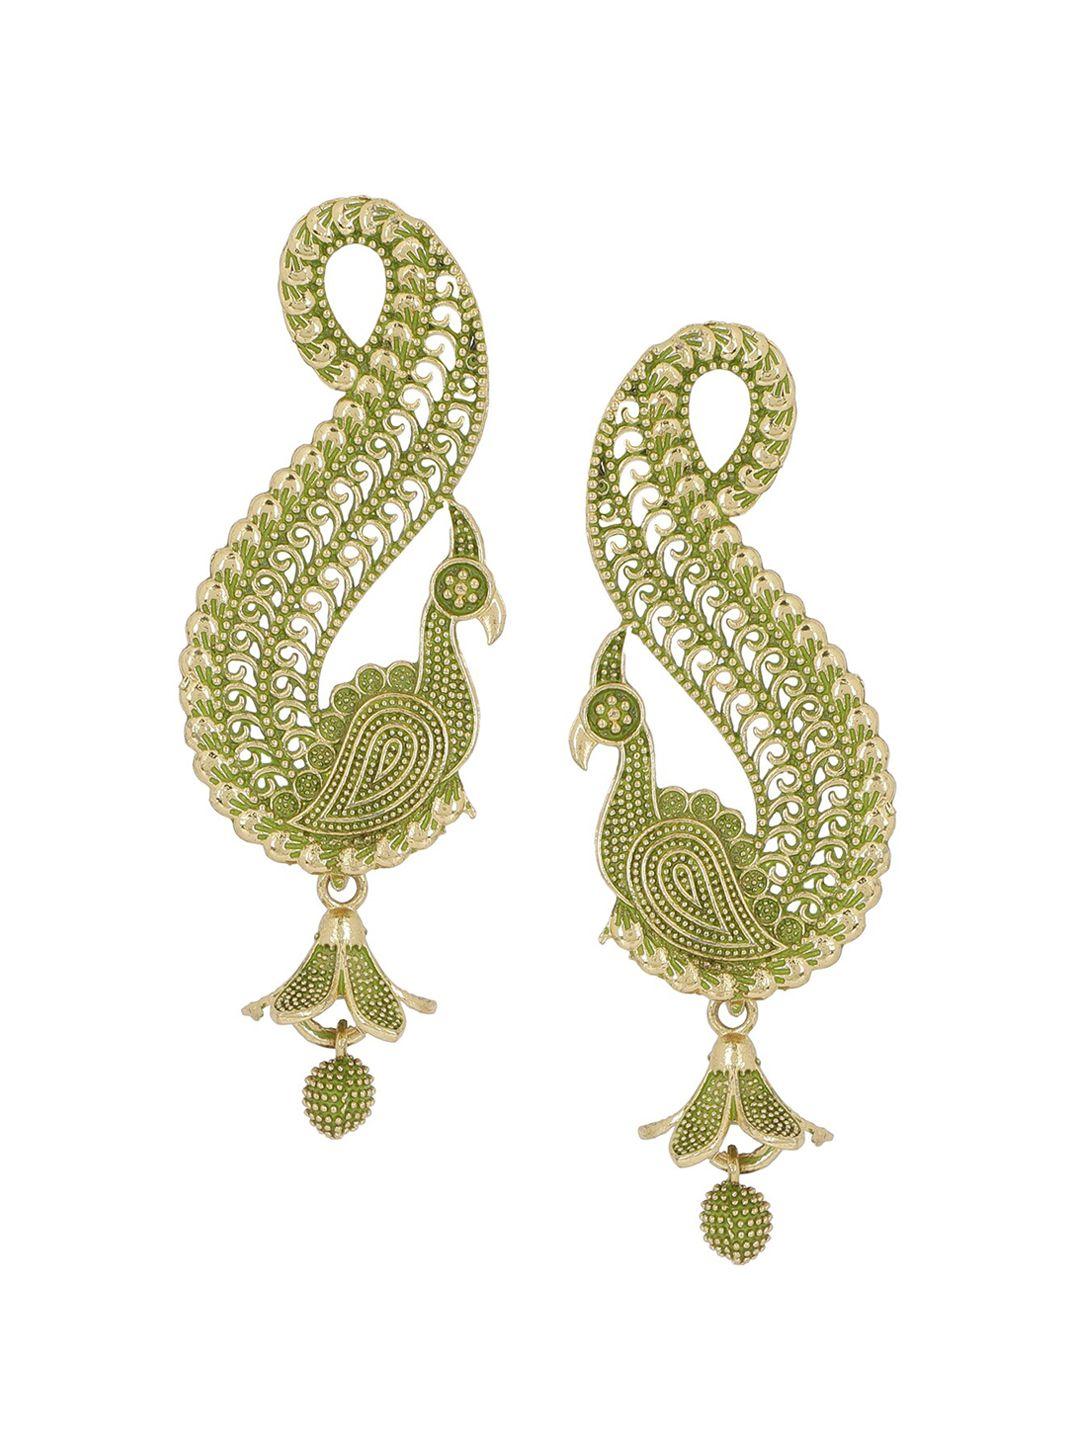 anikas creation olive green & gold-toned peacock shaped drop earrings